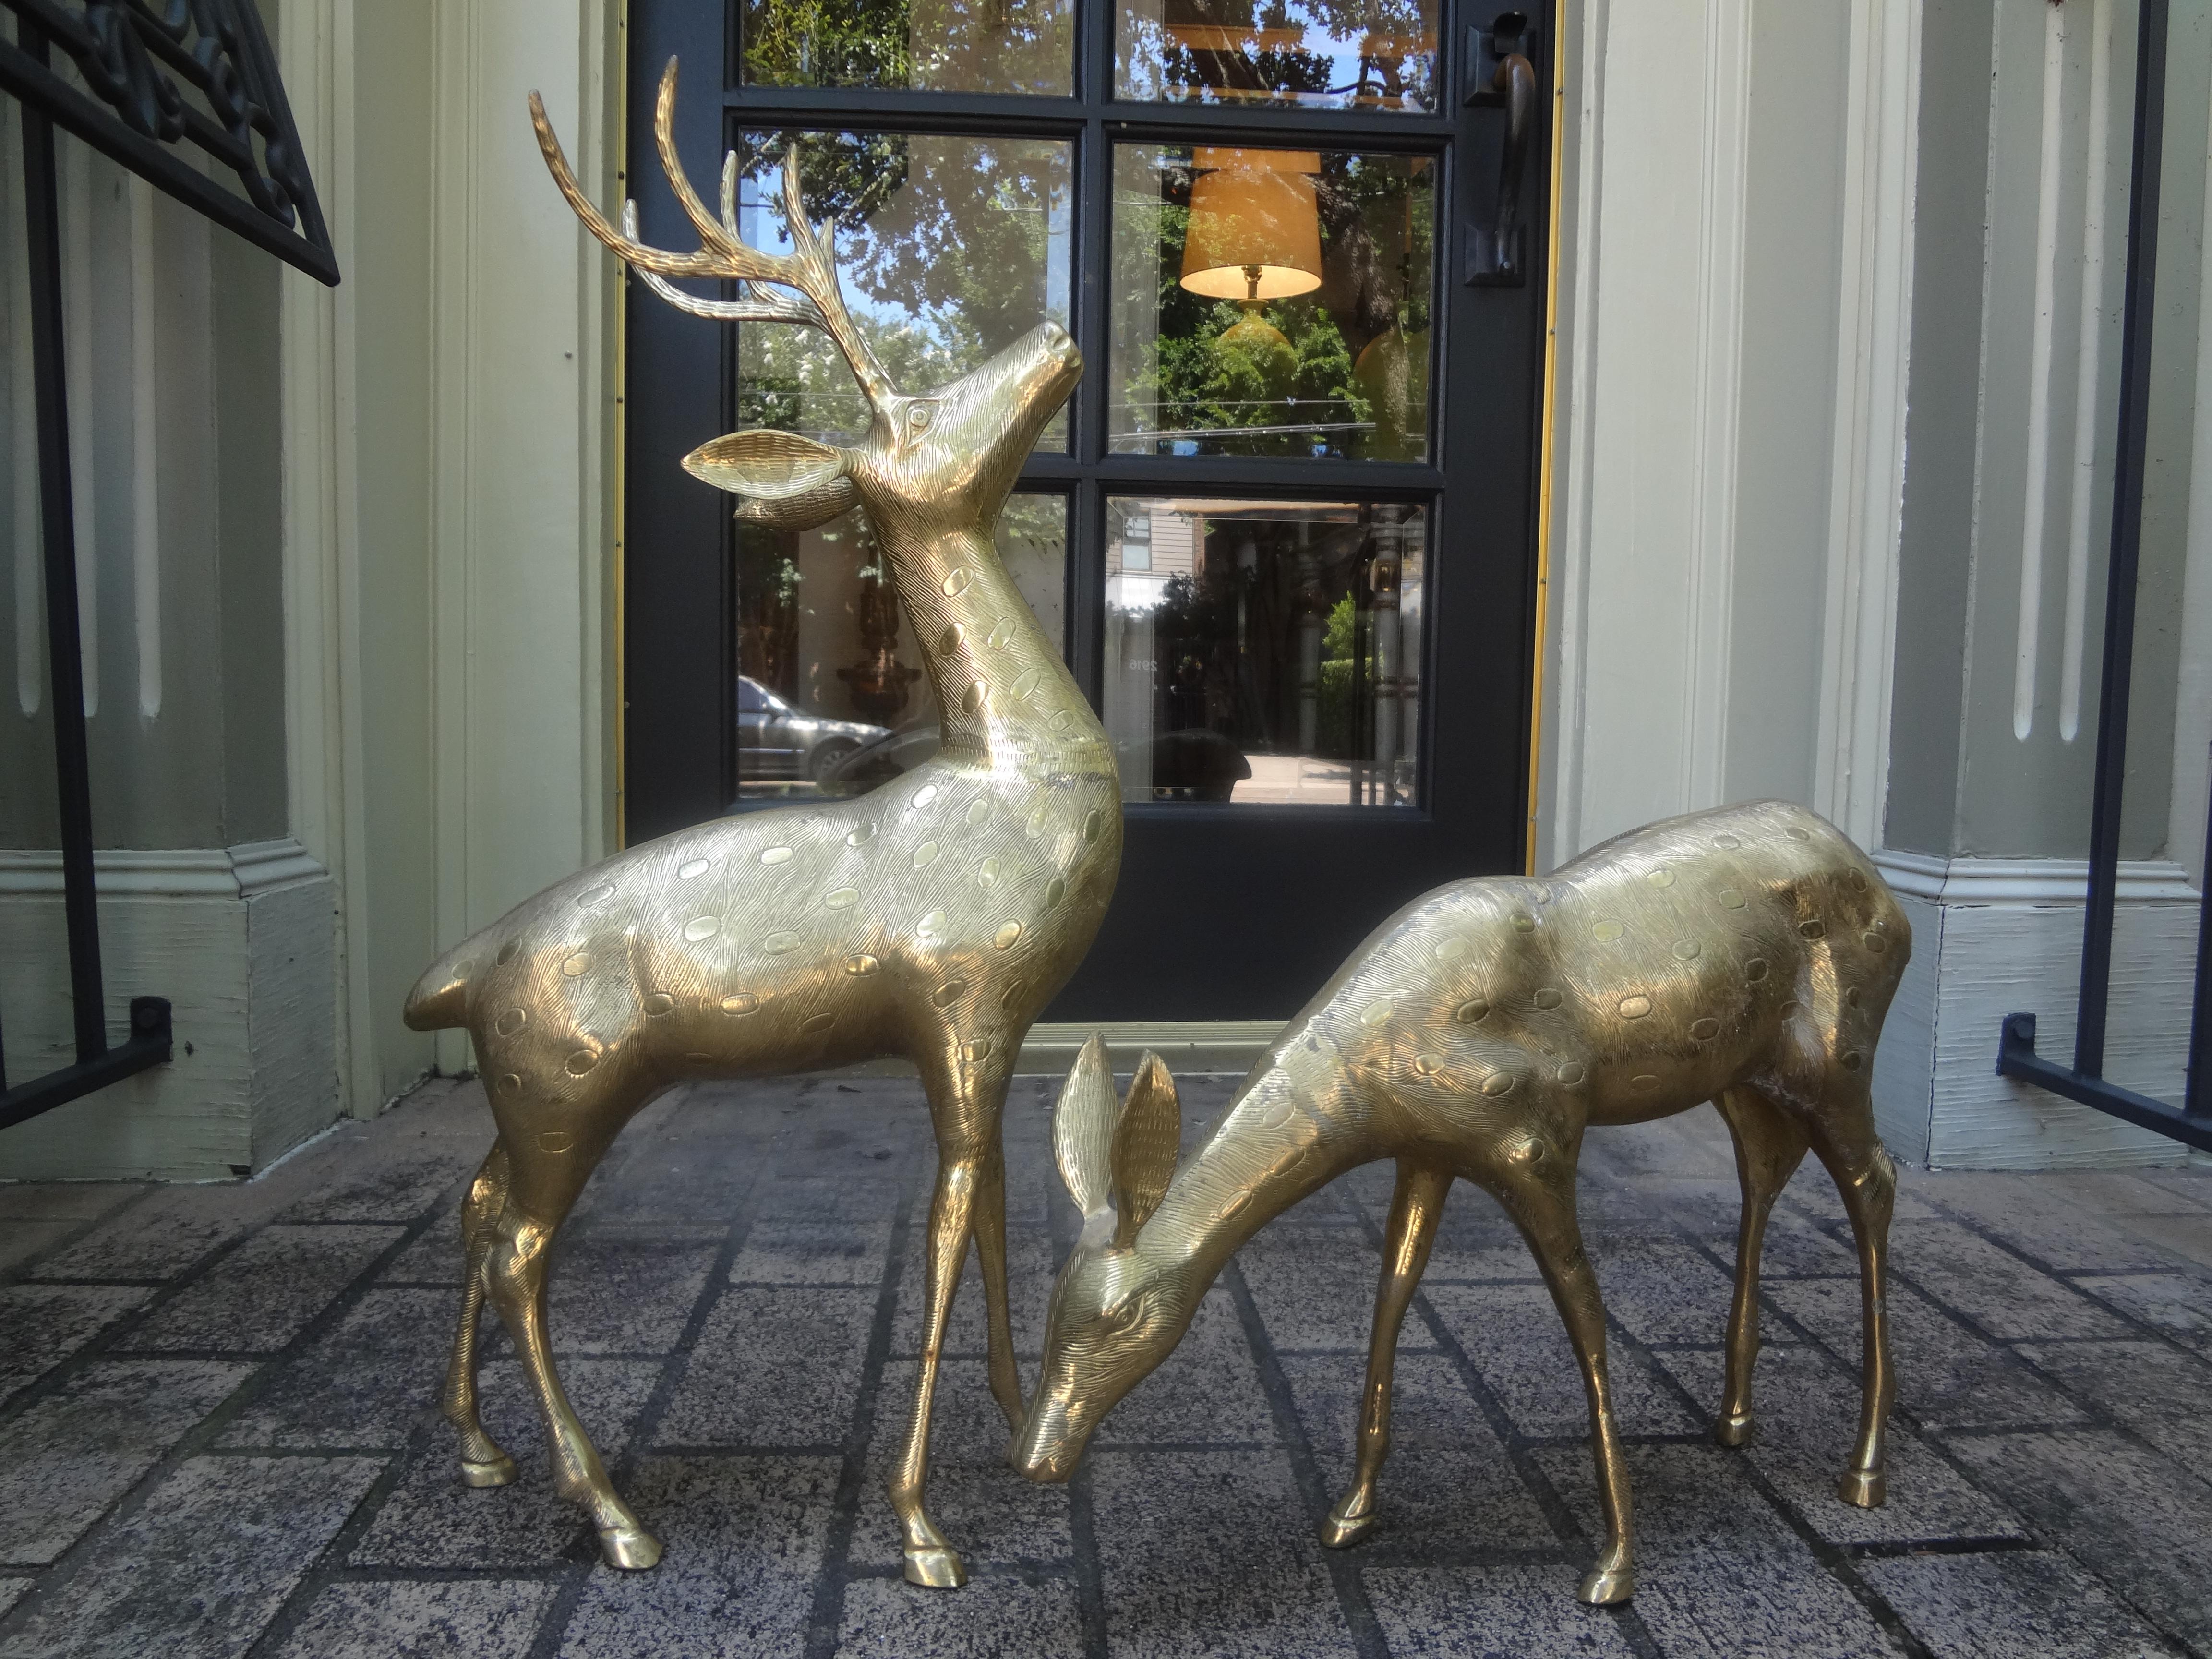 Beautiful pair of Hollywood Regency brass deer figures or brass deer table sculptures. These large well detailed brass deer sculptures have nice etching and are in great condition. Beautiful patina!
Dimensions: 
23.5 inches H, 10.38 inches L, 3.75